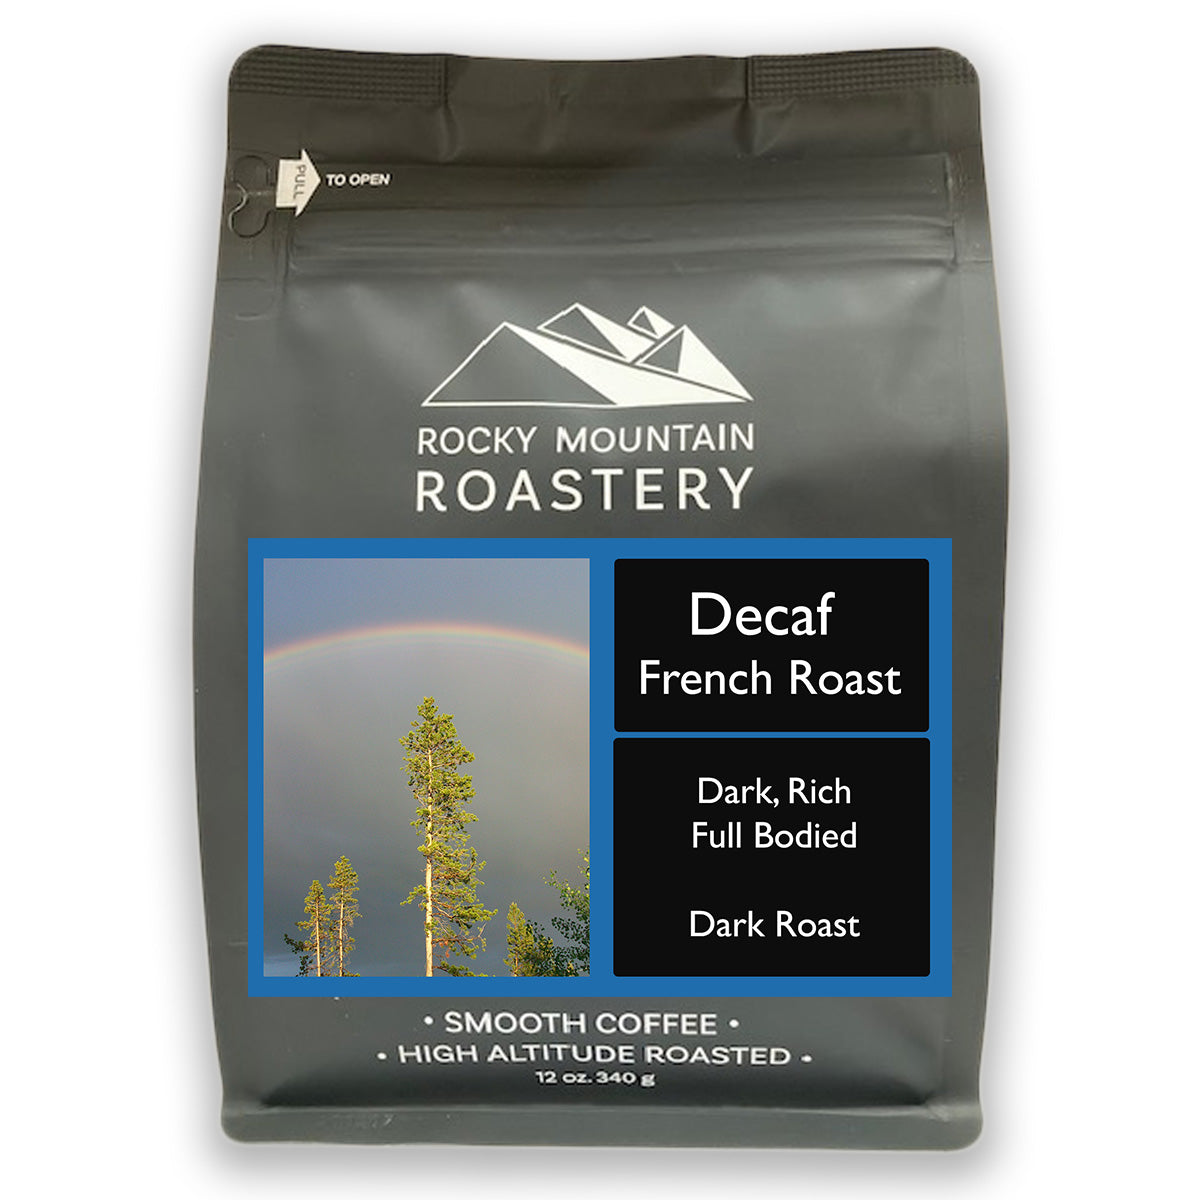 Picture of a bag of Decaf French Roast Coffee